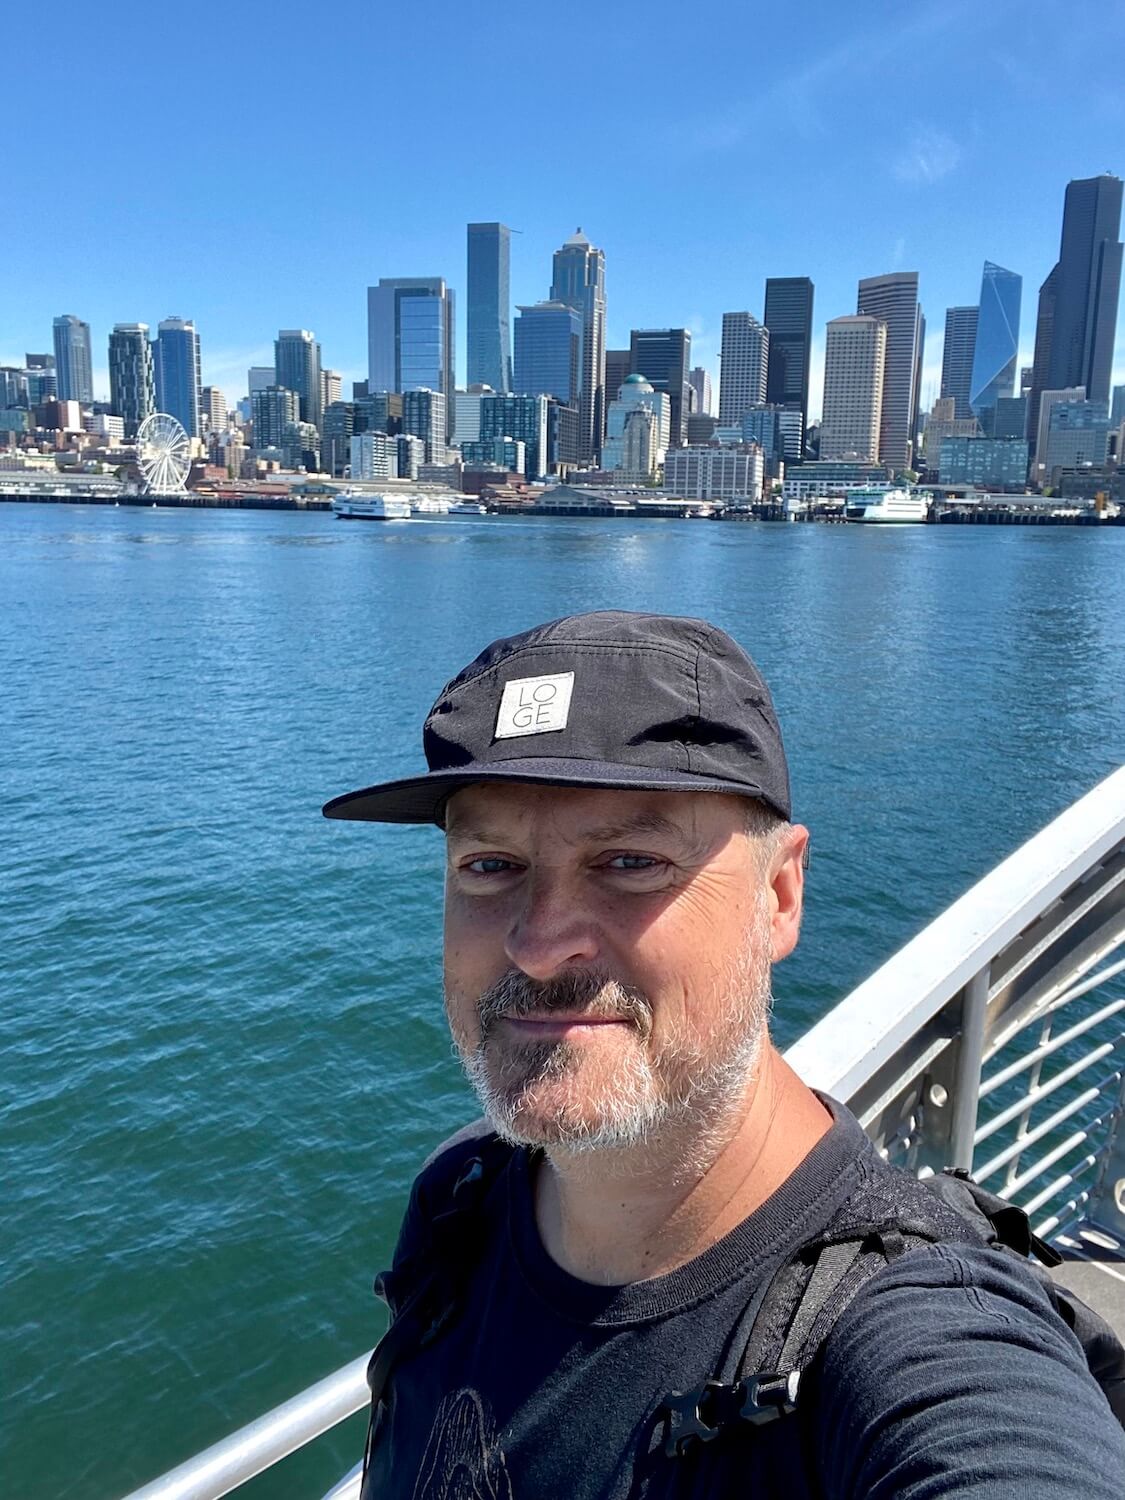 Matthew Kessi takes a selfie with the backdrop of Downtown Seattle behind him. He's on a boat with a metal railings and wearing a black t-shirt and hat.